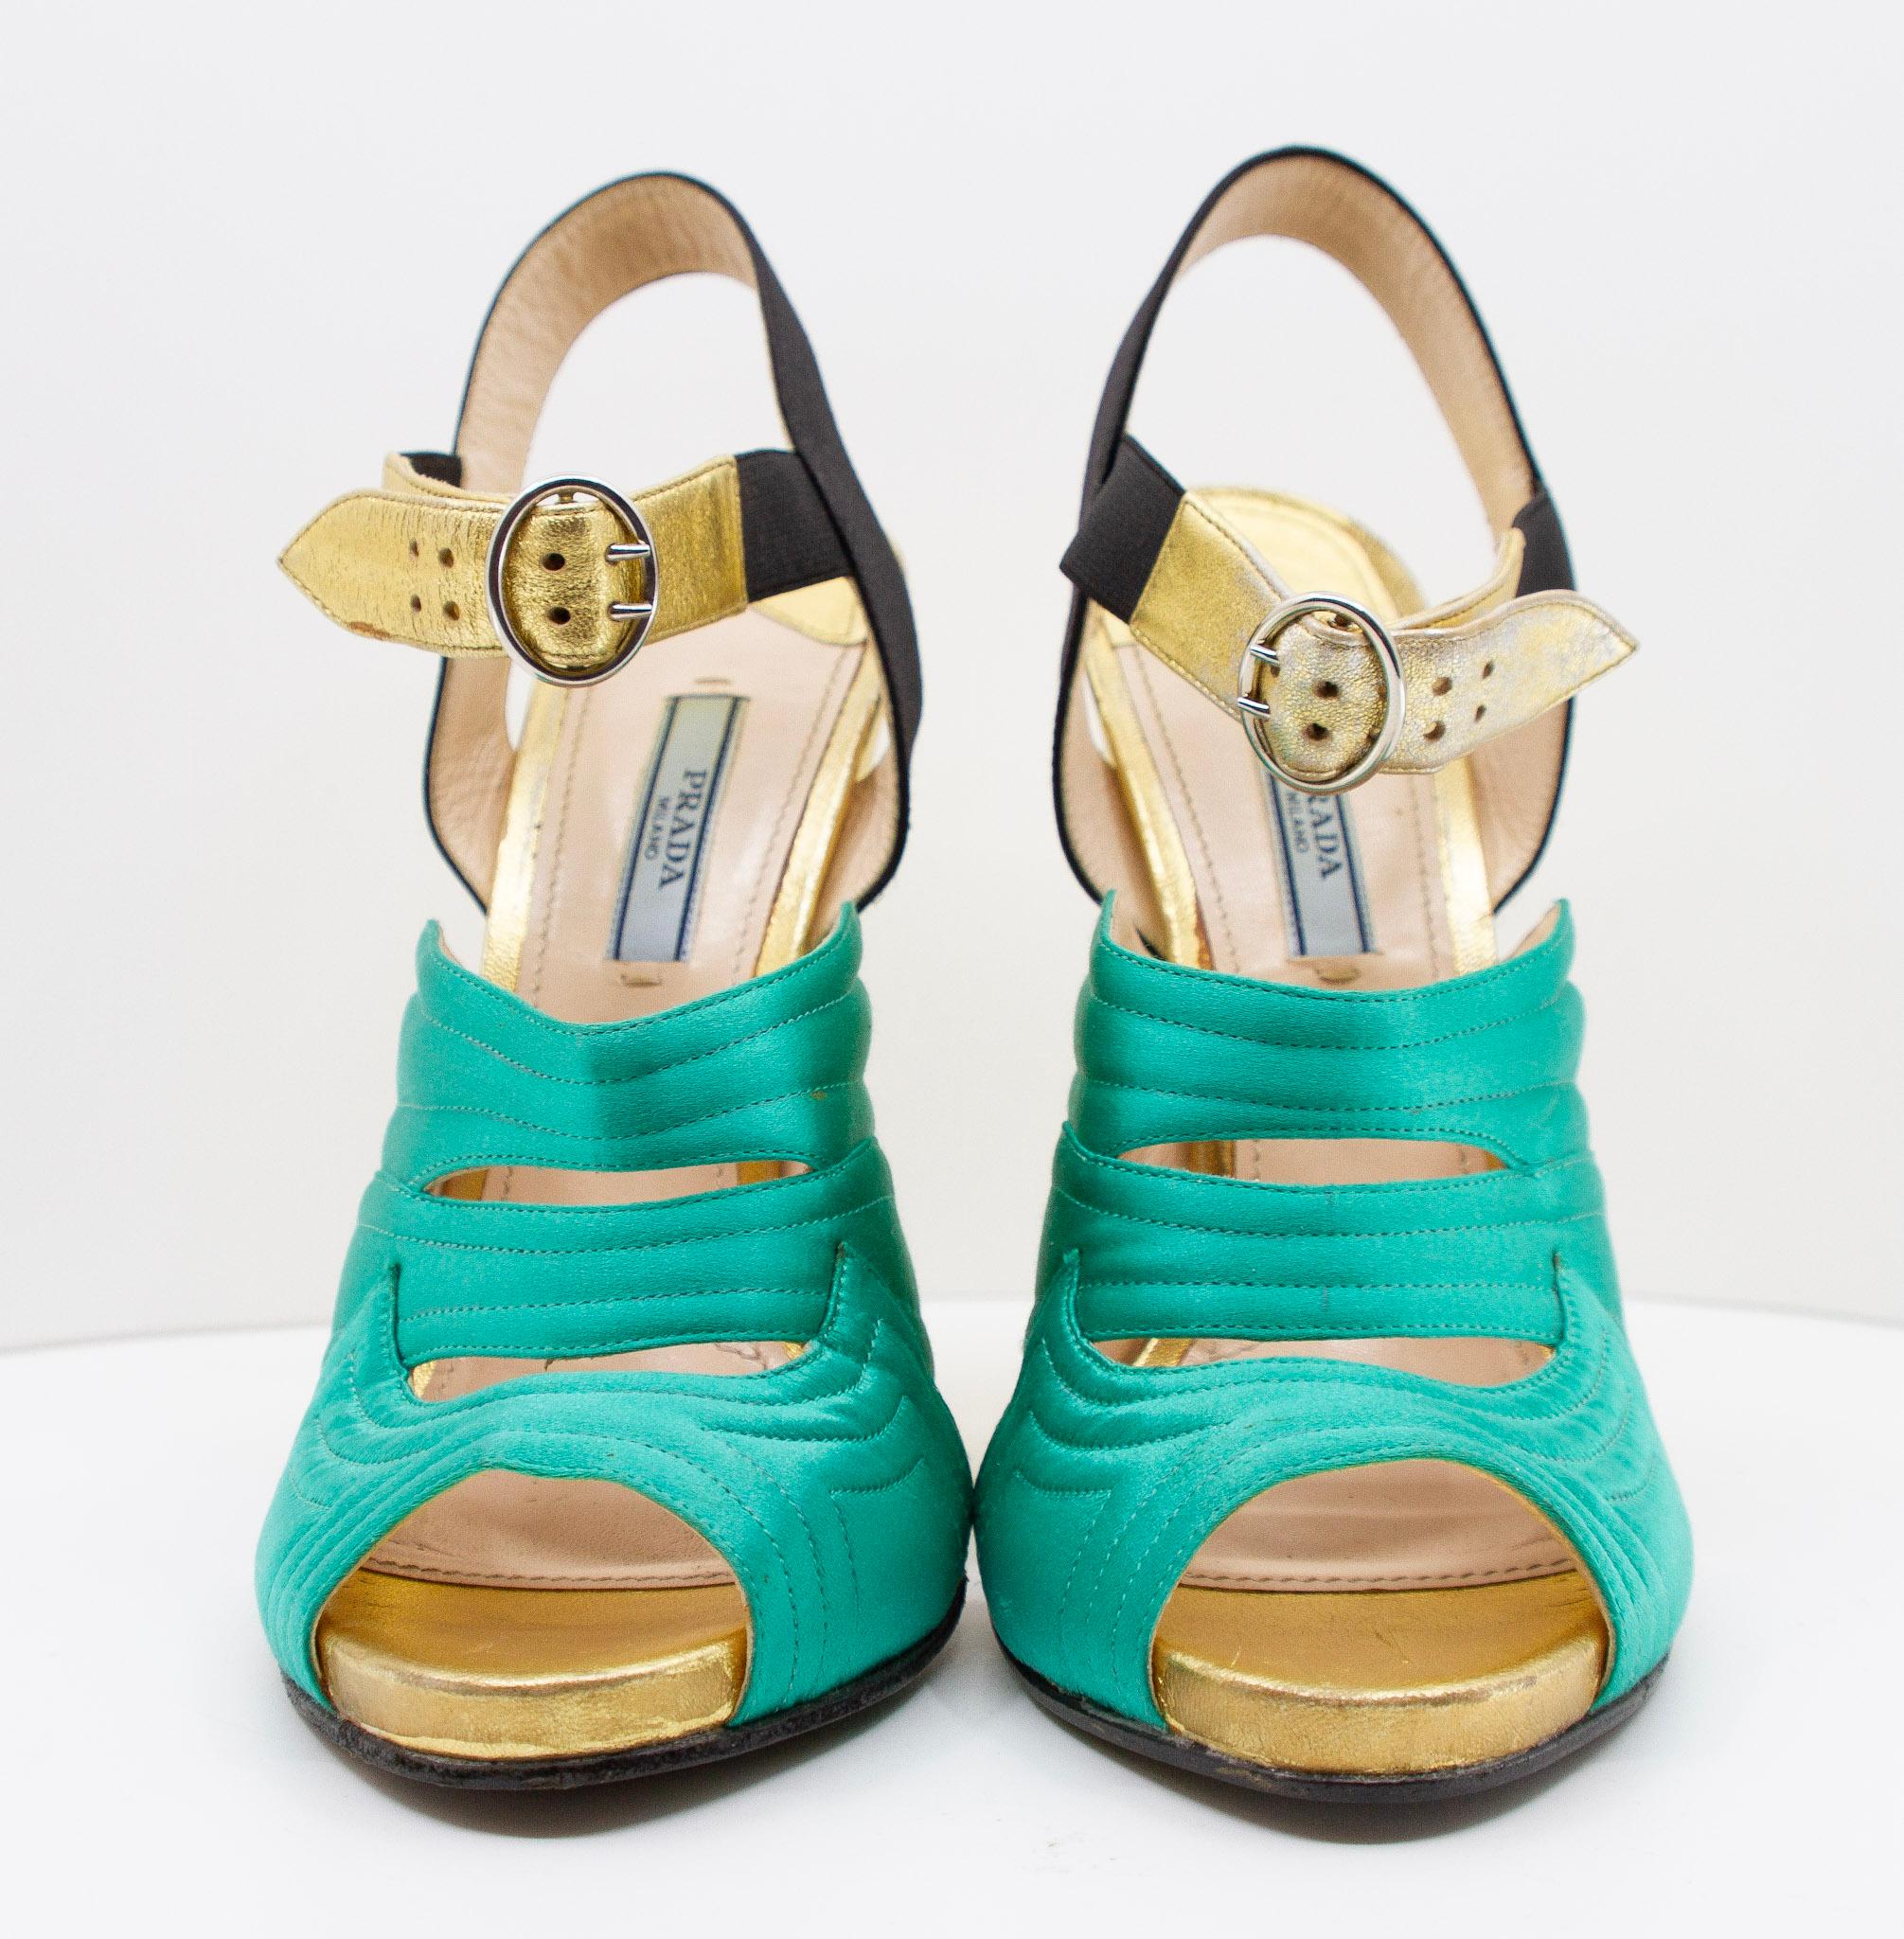 Prada green and gold metallic heels In Excellent Condition For Sale In Kingston, NY